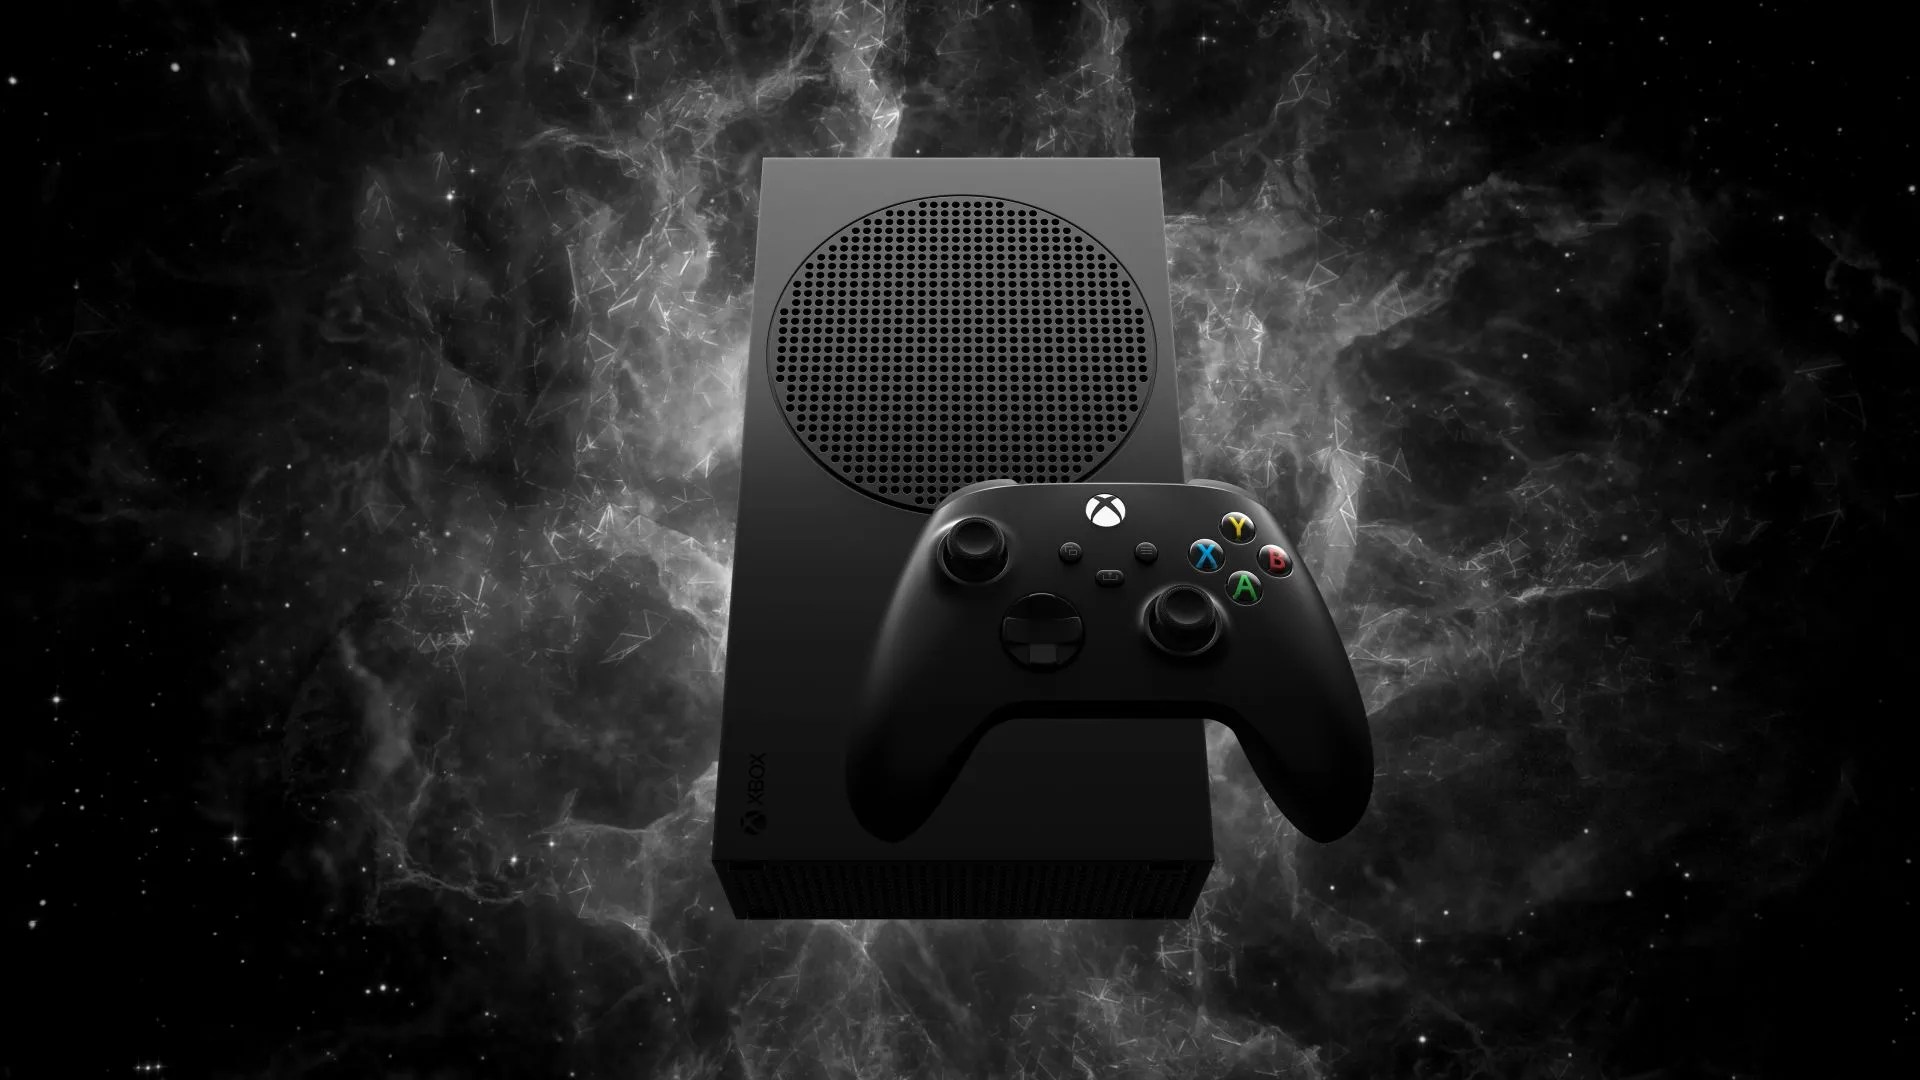 A Carbon Black version of the Xbox Series S - 1 TB.